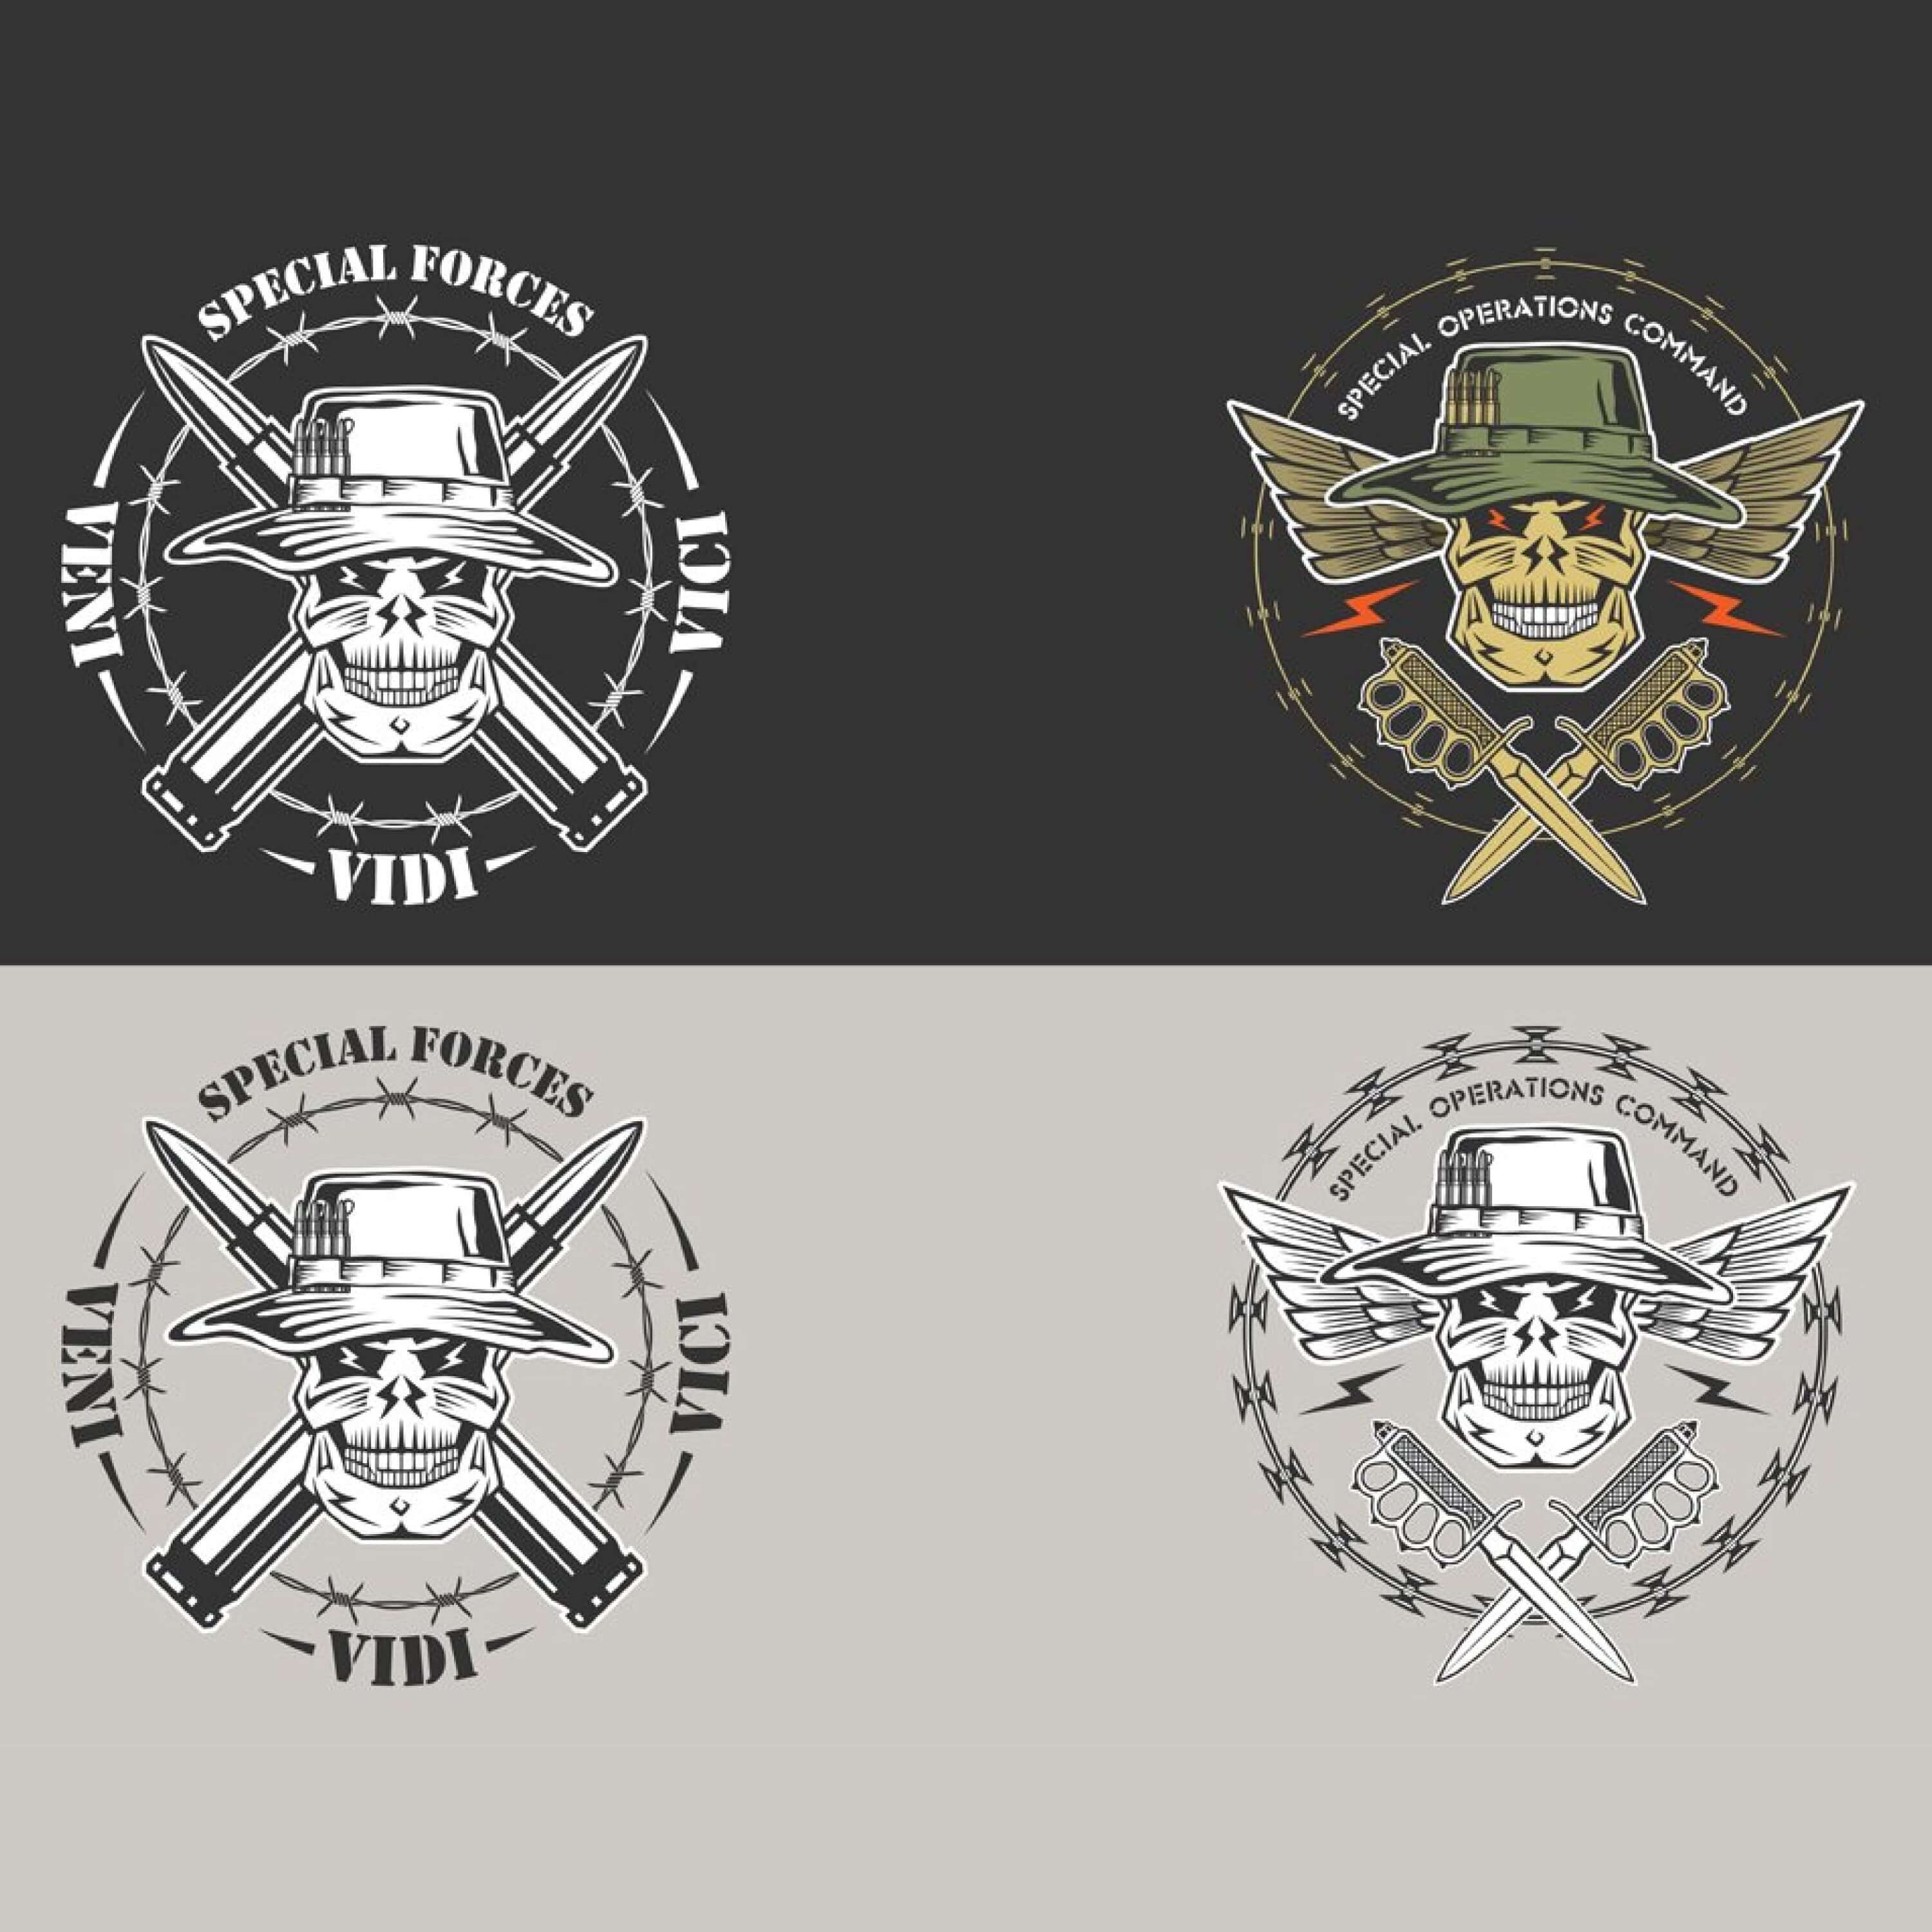 Skulls of militarized people on black and gray backgrounds.